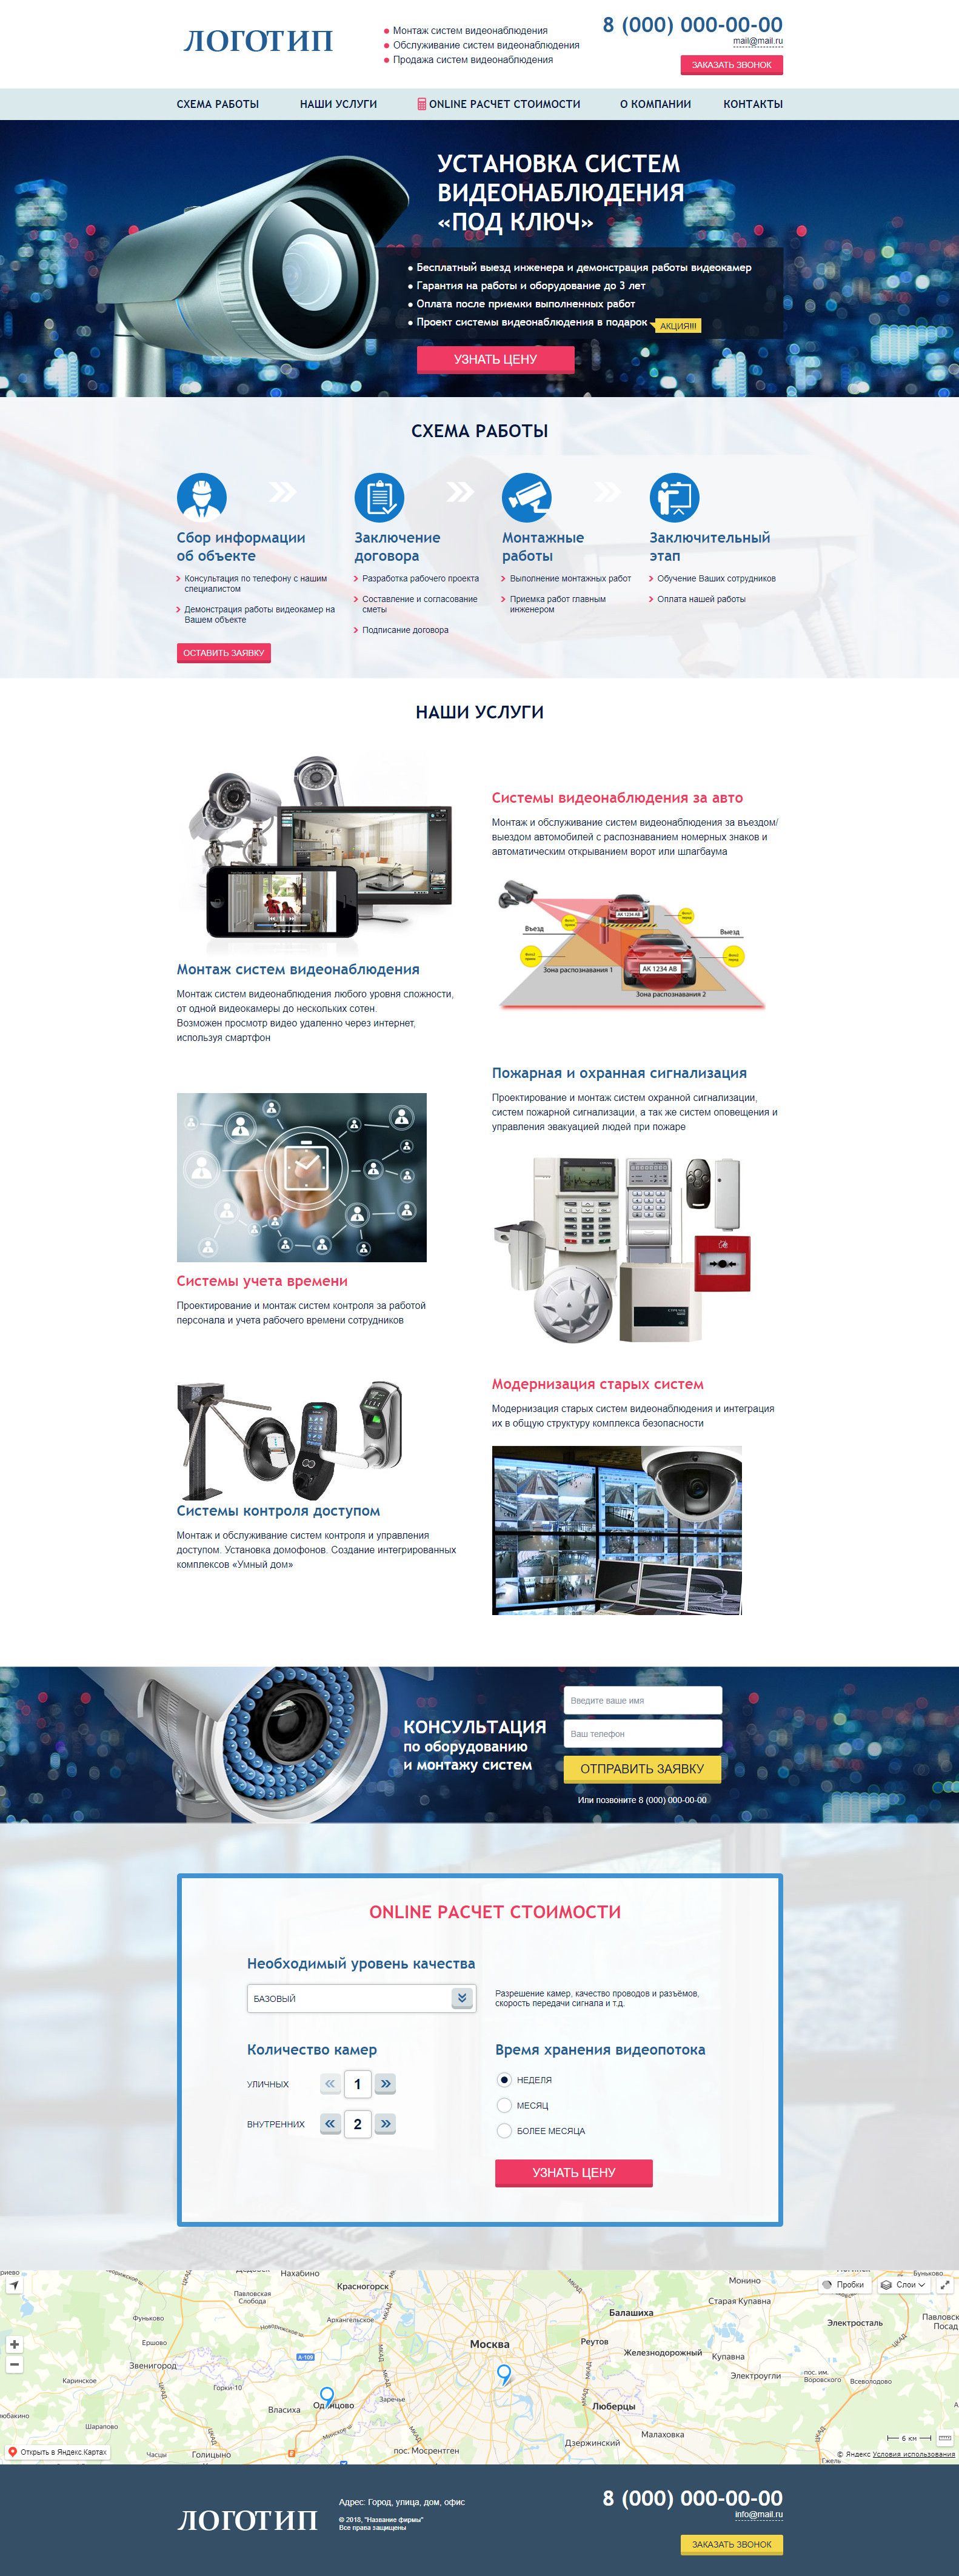 Landing page - Sale of video surveillance systems